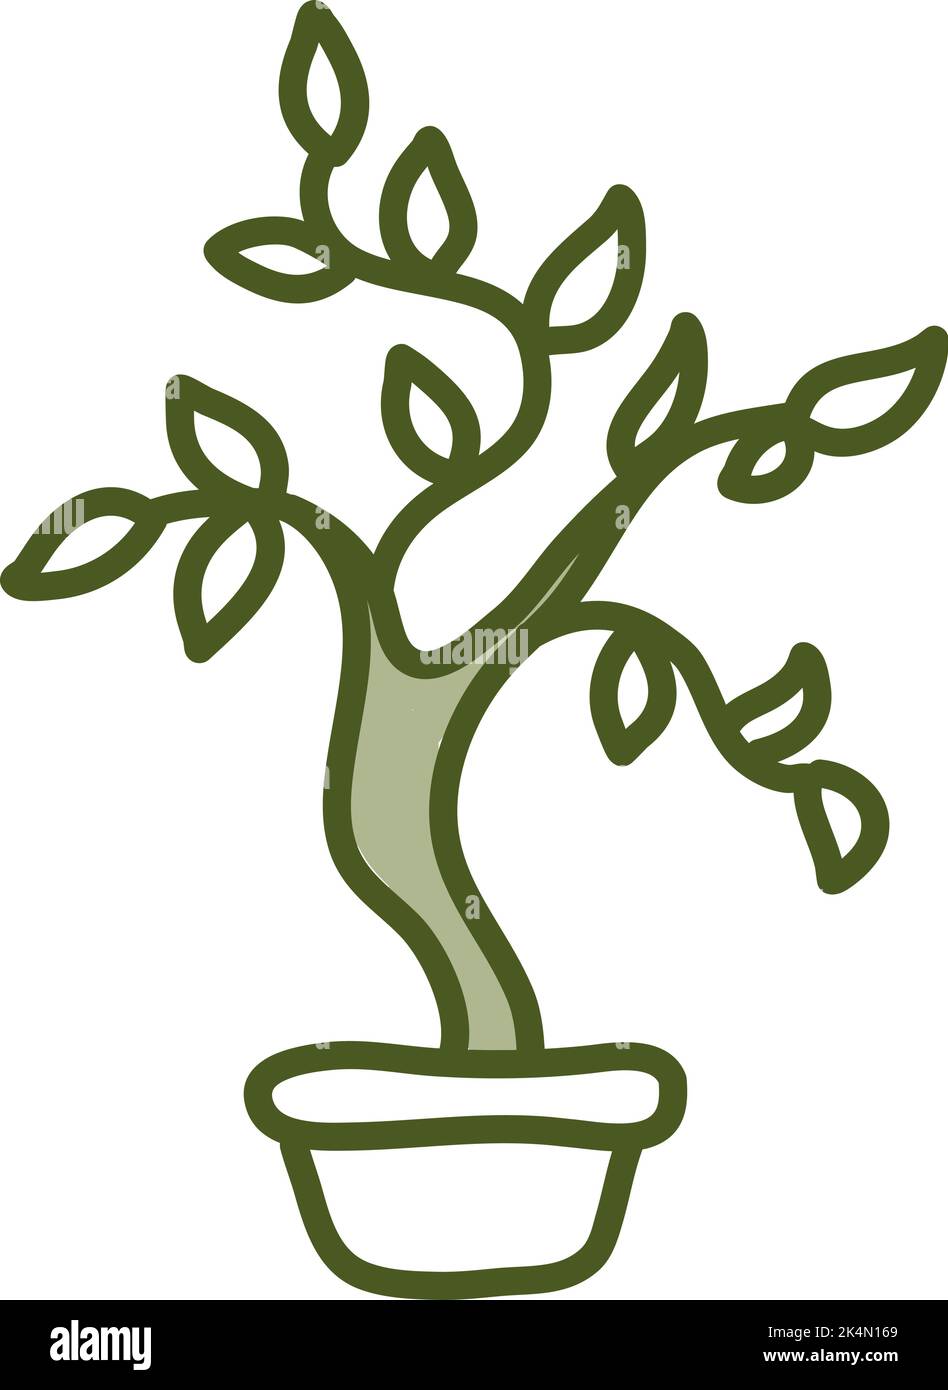 Bonsai tree in pot, illustration, vector on a white background. Stock Vector